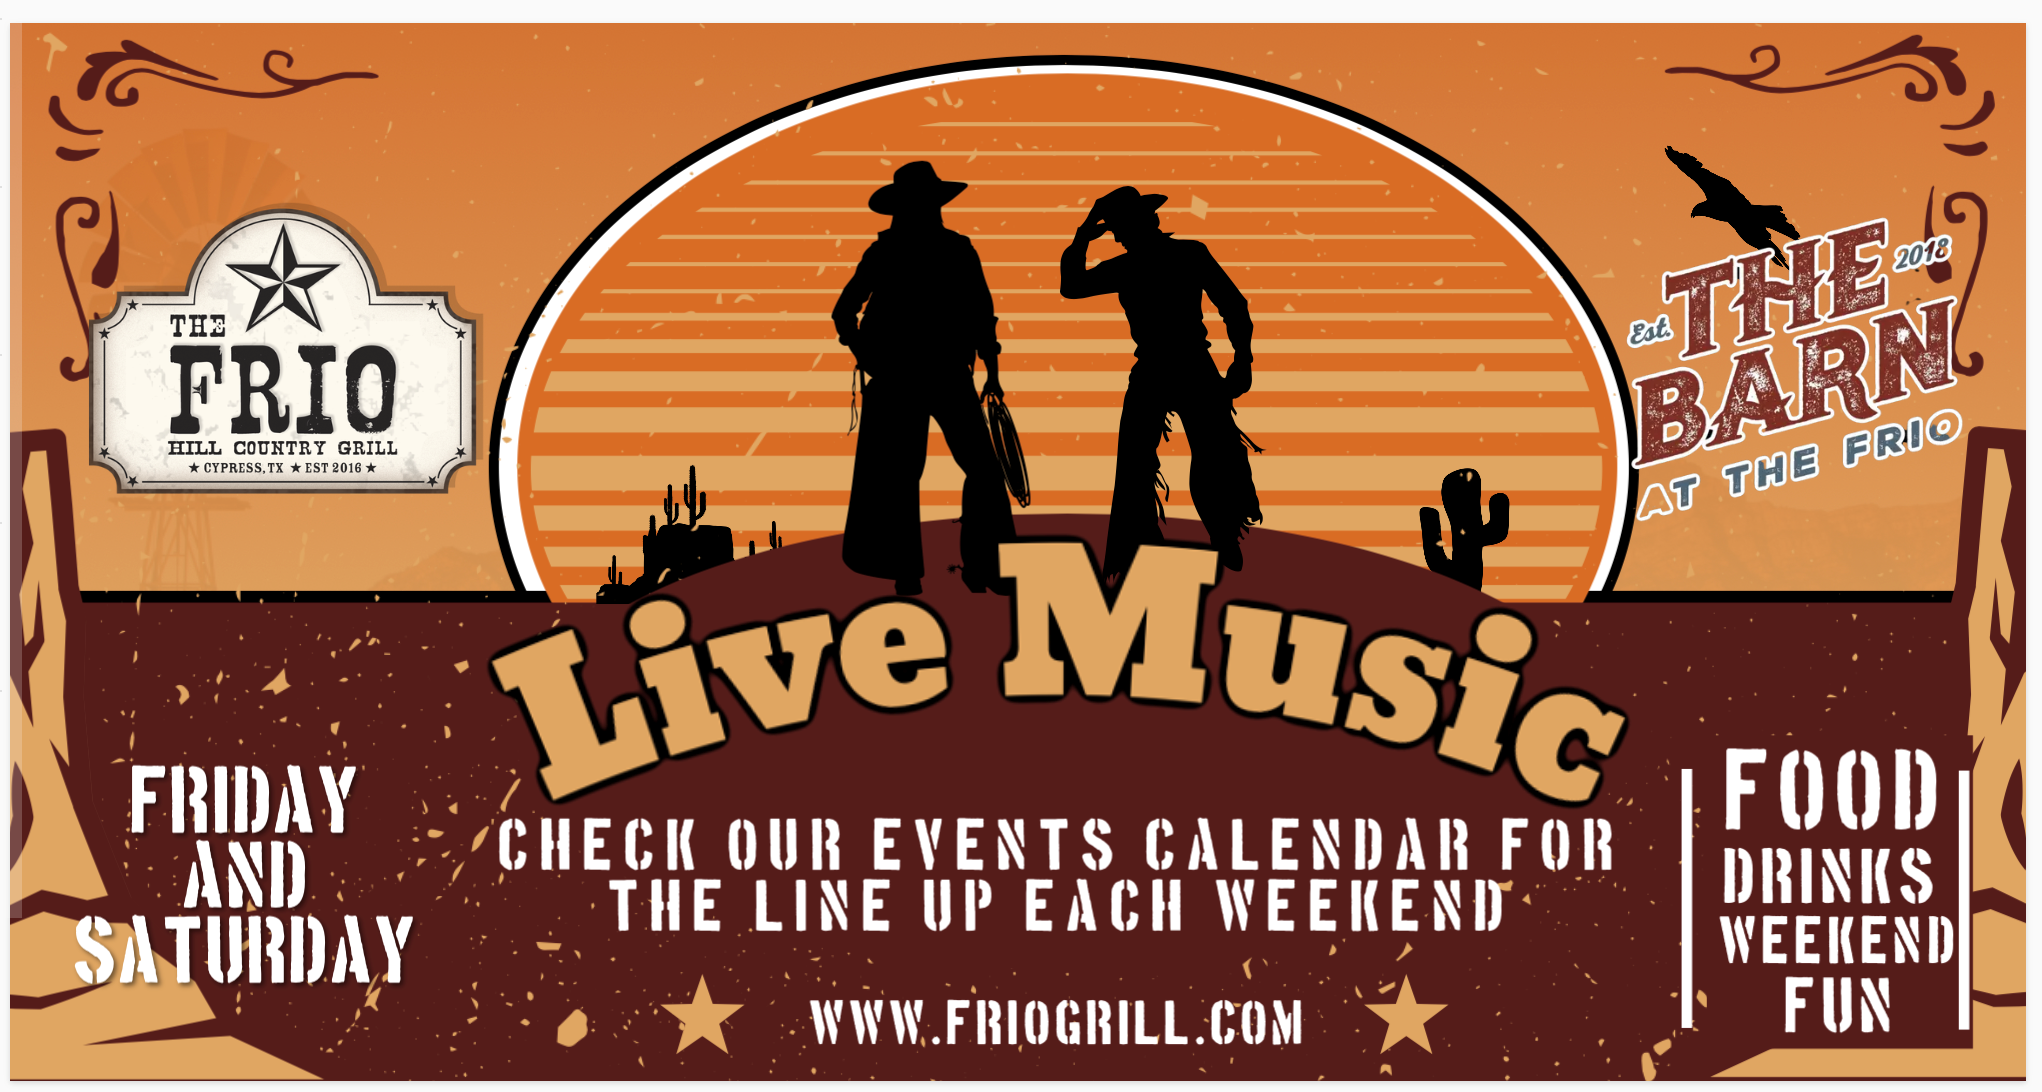 January Music Calendar at Frio Grill and The Barn!